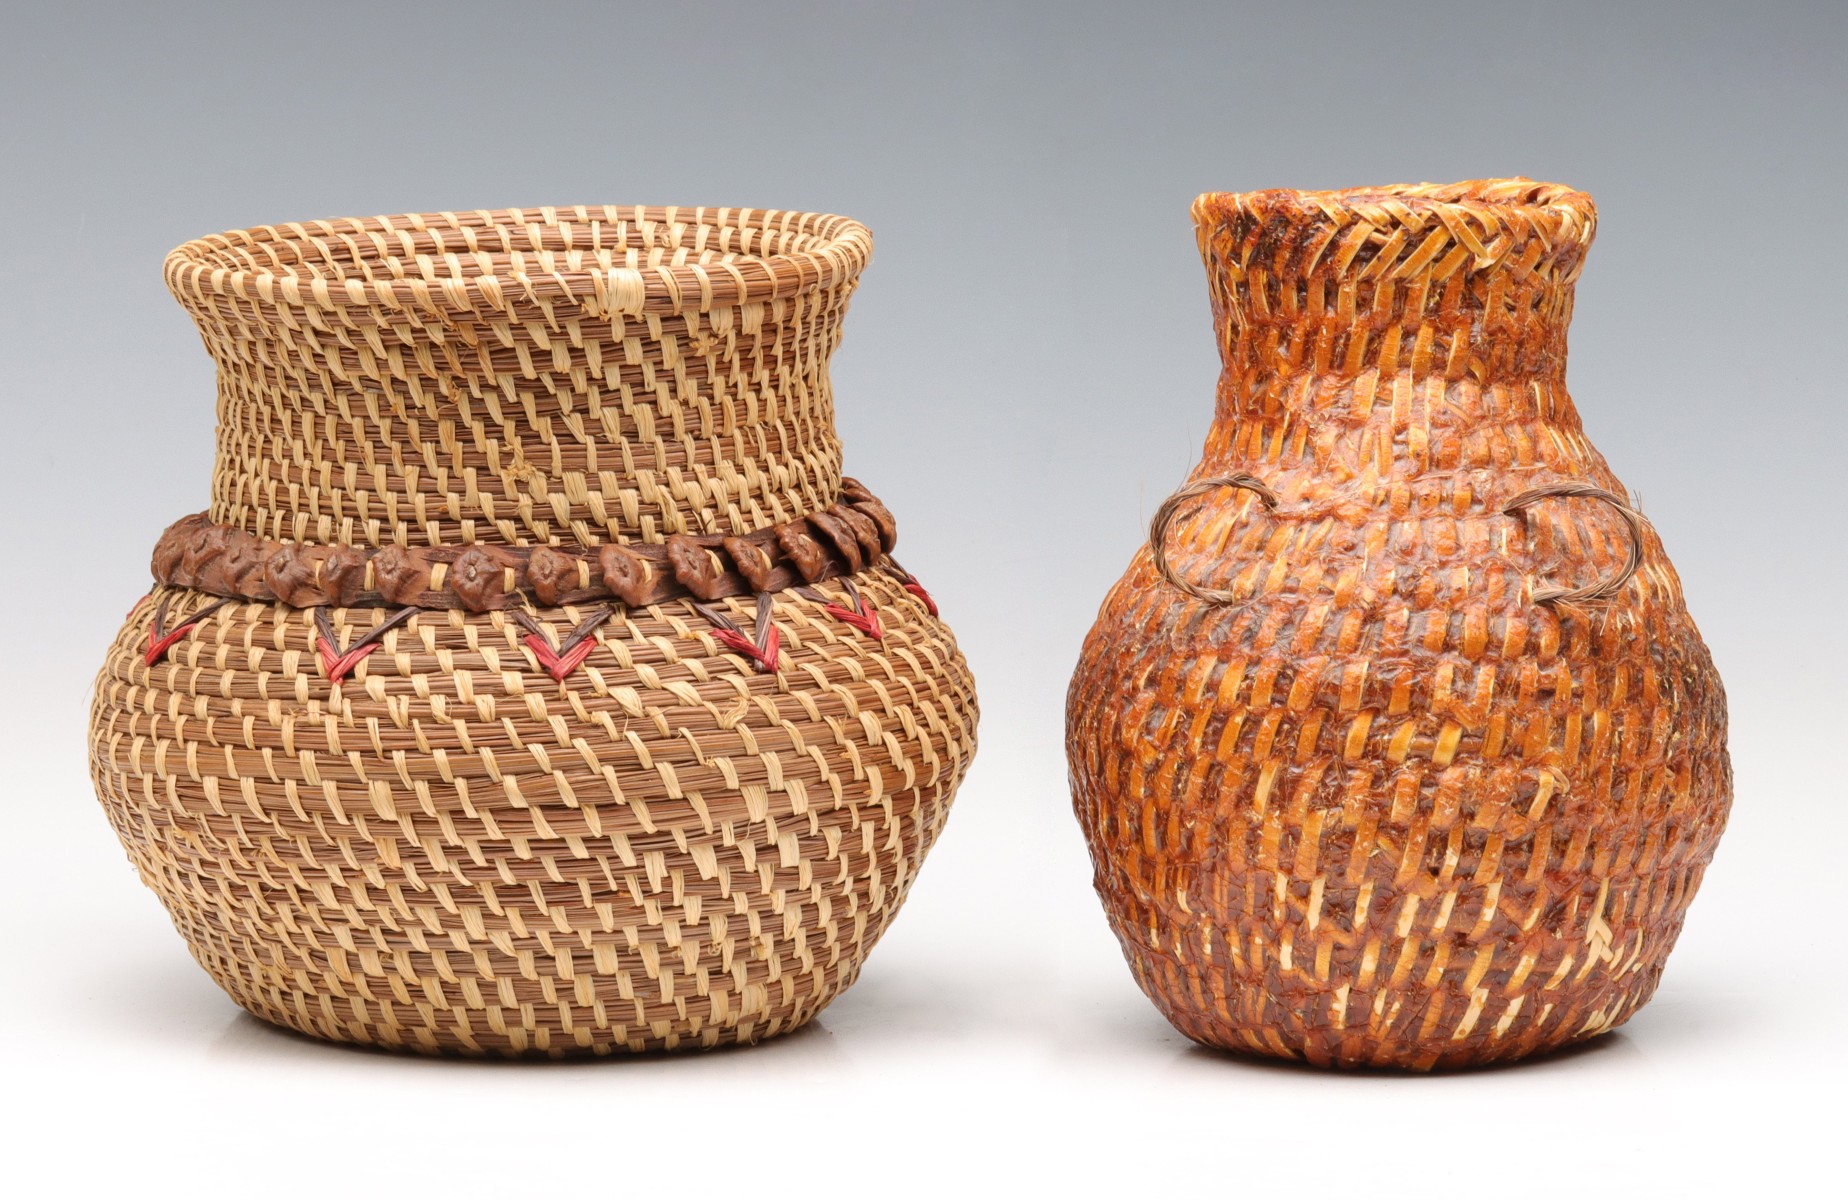 A LORENA LANGLEY PINE NEEDLE BASKET, PLUS ANOTHER